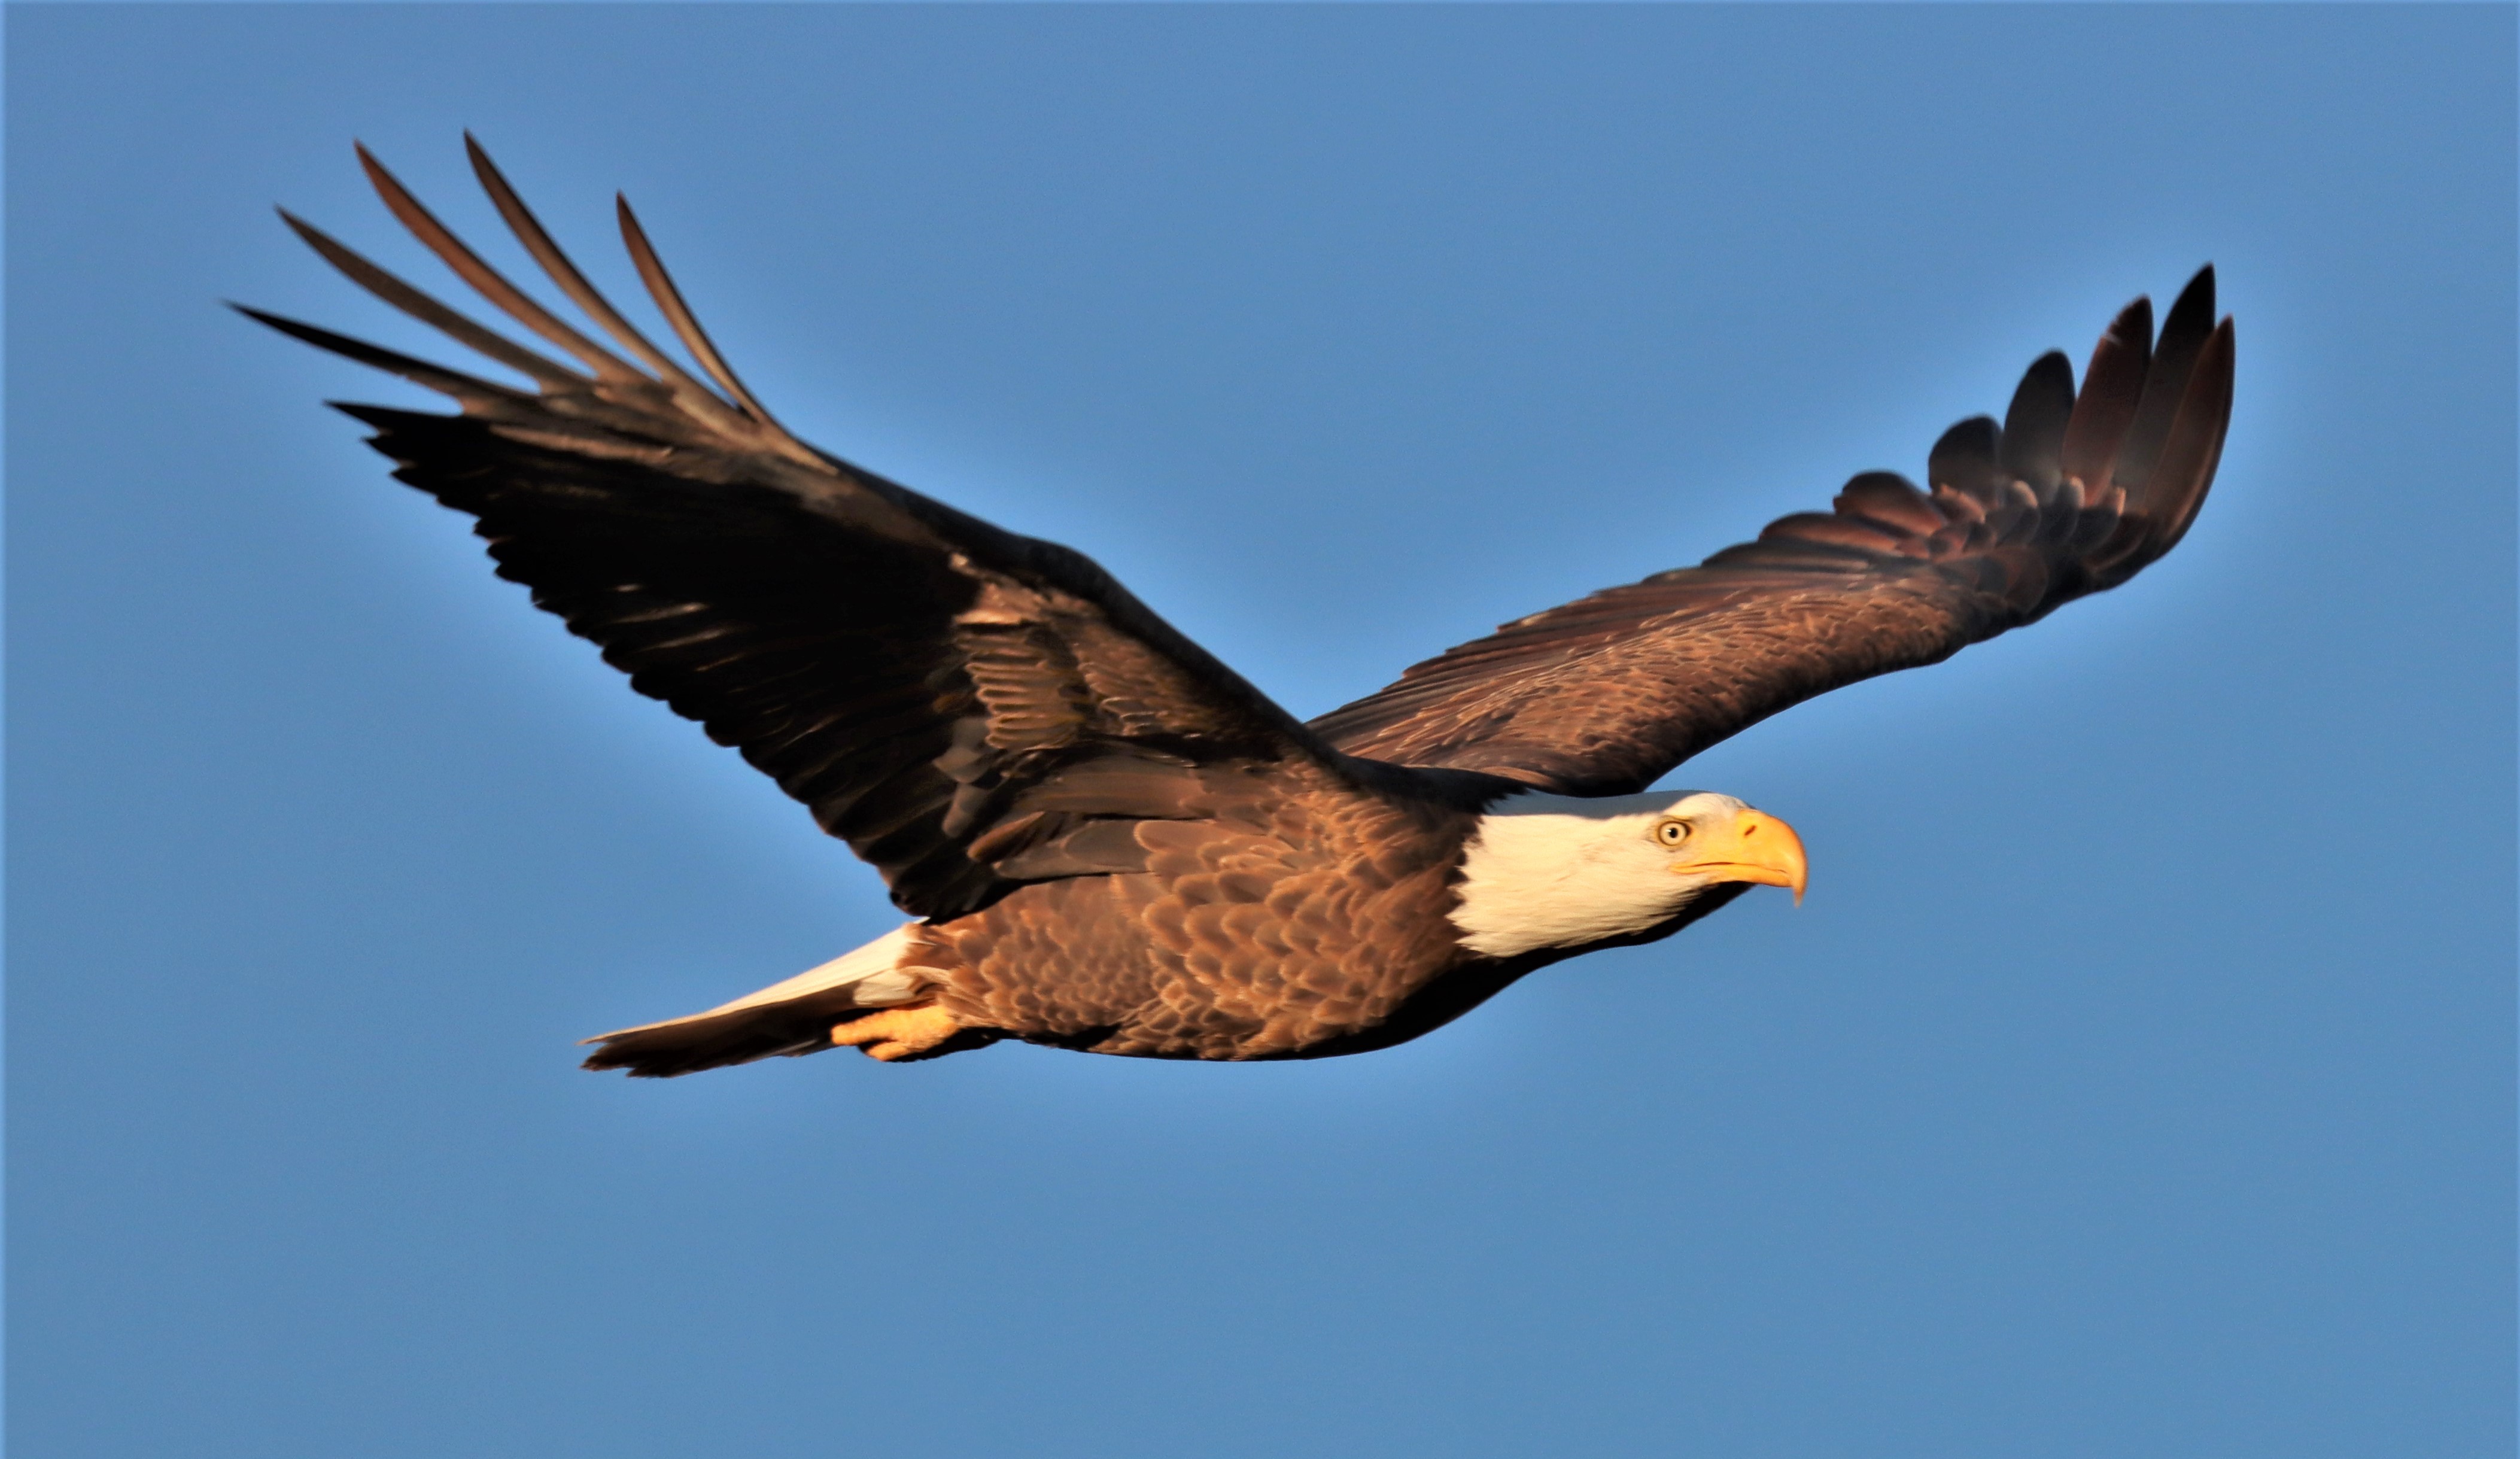 Photo by Buddy Walker  |  Bald Eagle flying free "Early Morning Sun Rays"